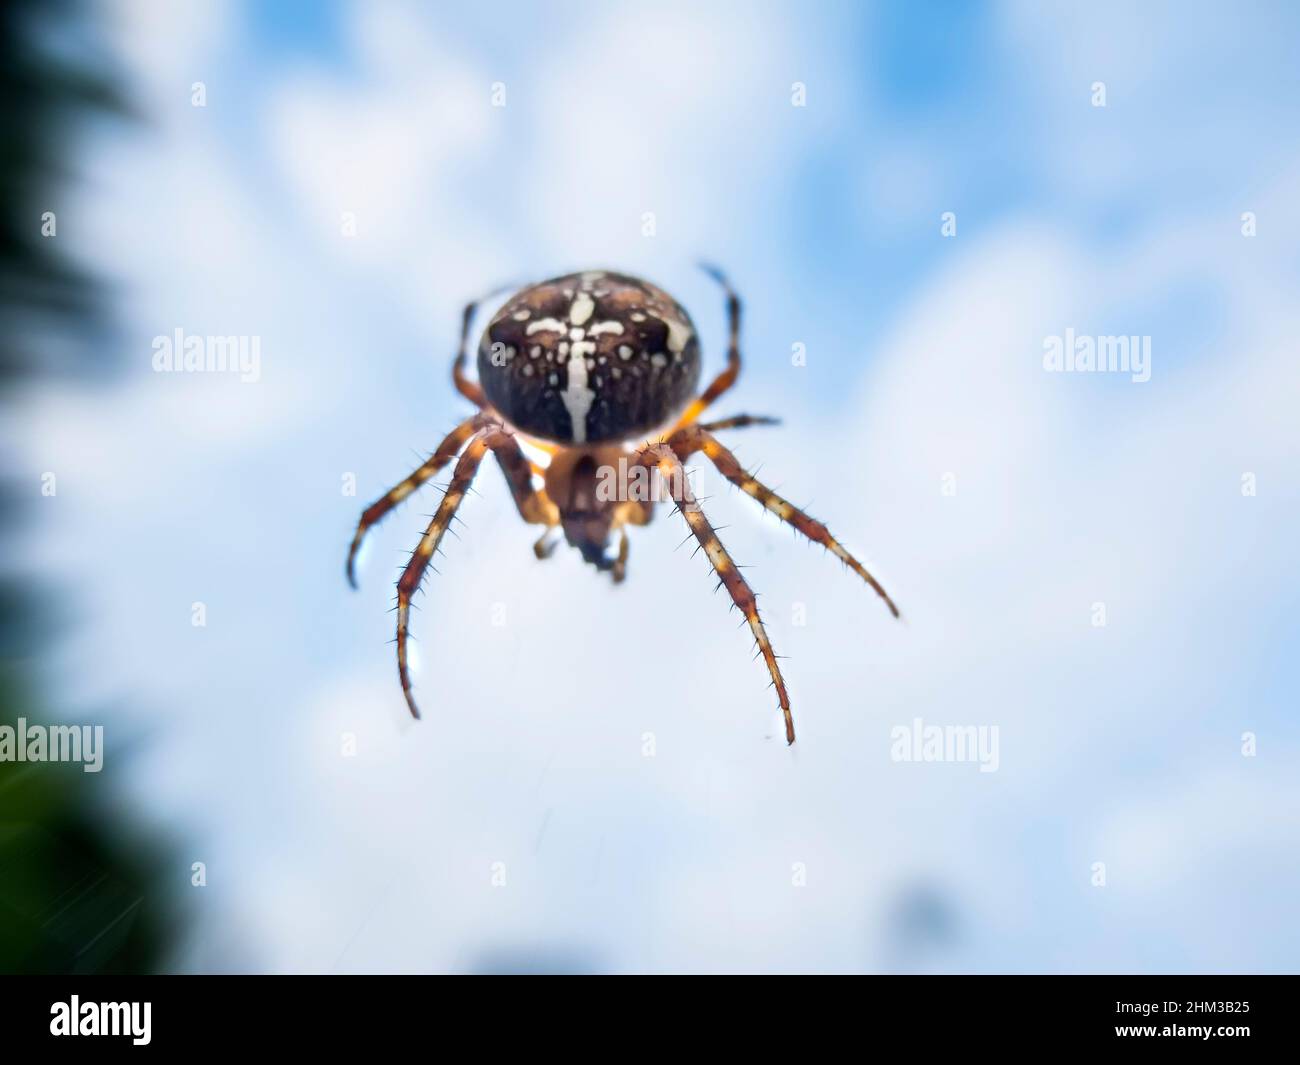 Macro view of a garden spider against a cloudy sky with shallow depth of field. Stock Photo